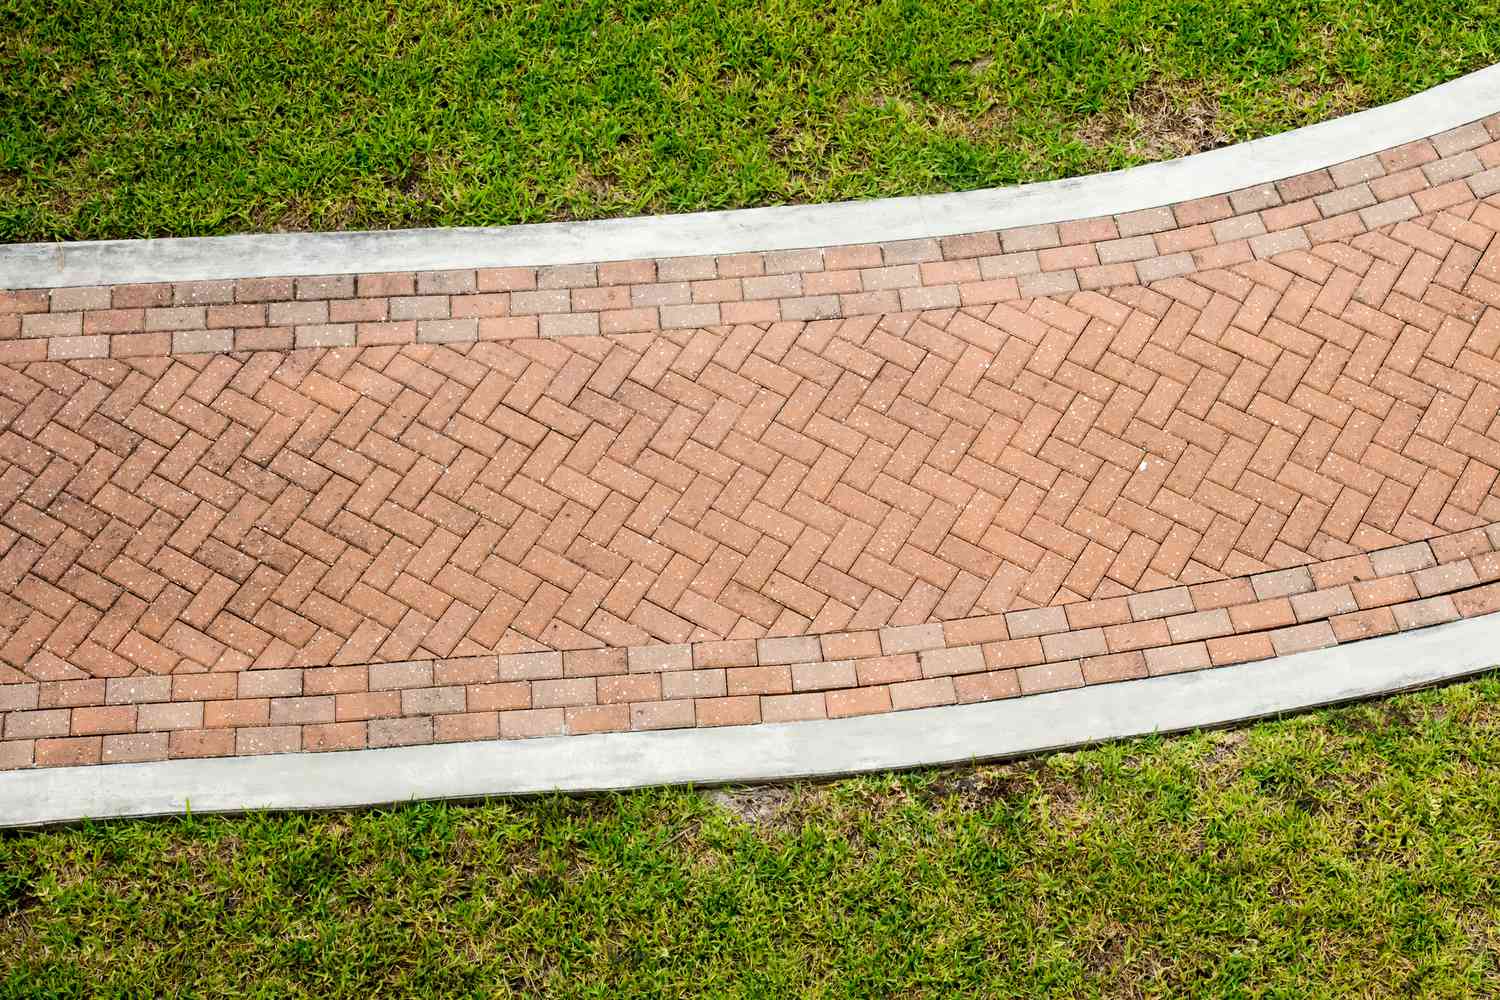 How To Lay Brick Paver Walkway Patterns For A Custom Look